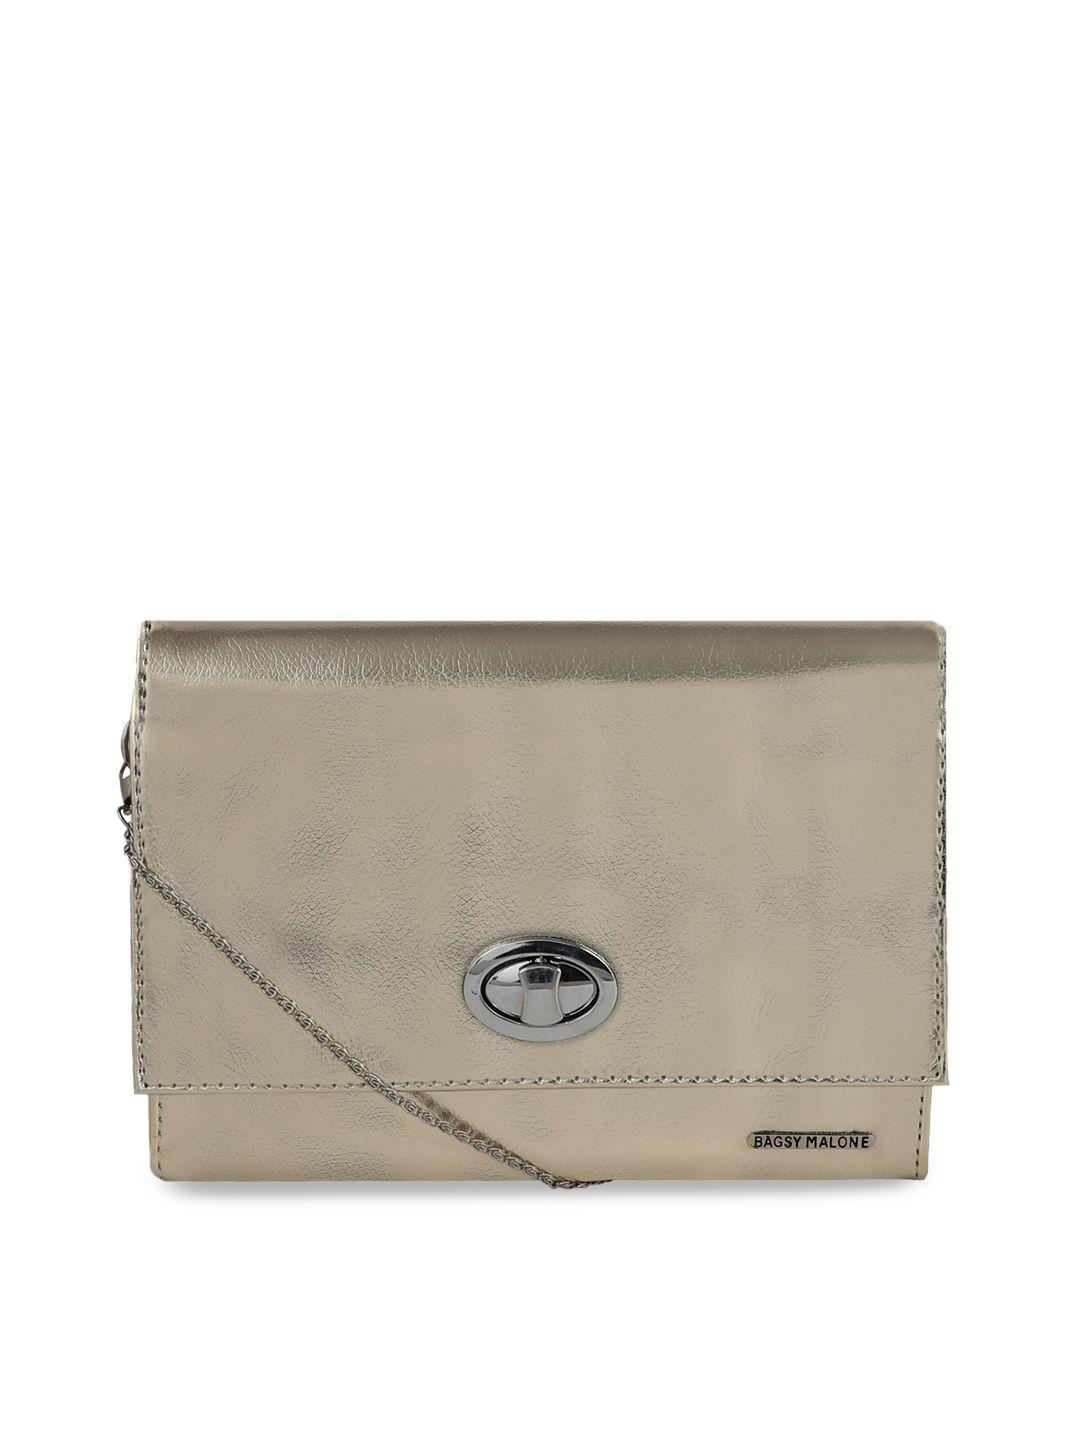 bagsy malone metallic gold-toned pu structured sling bag